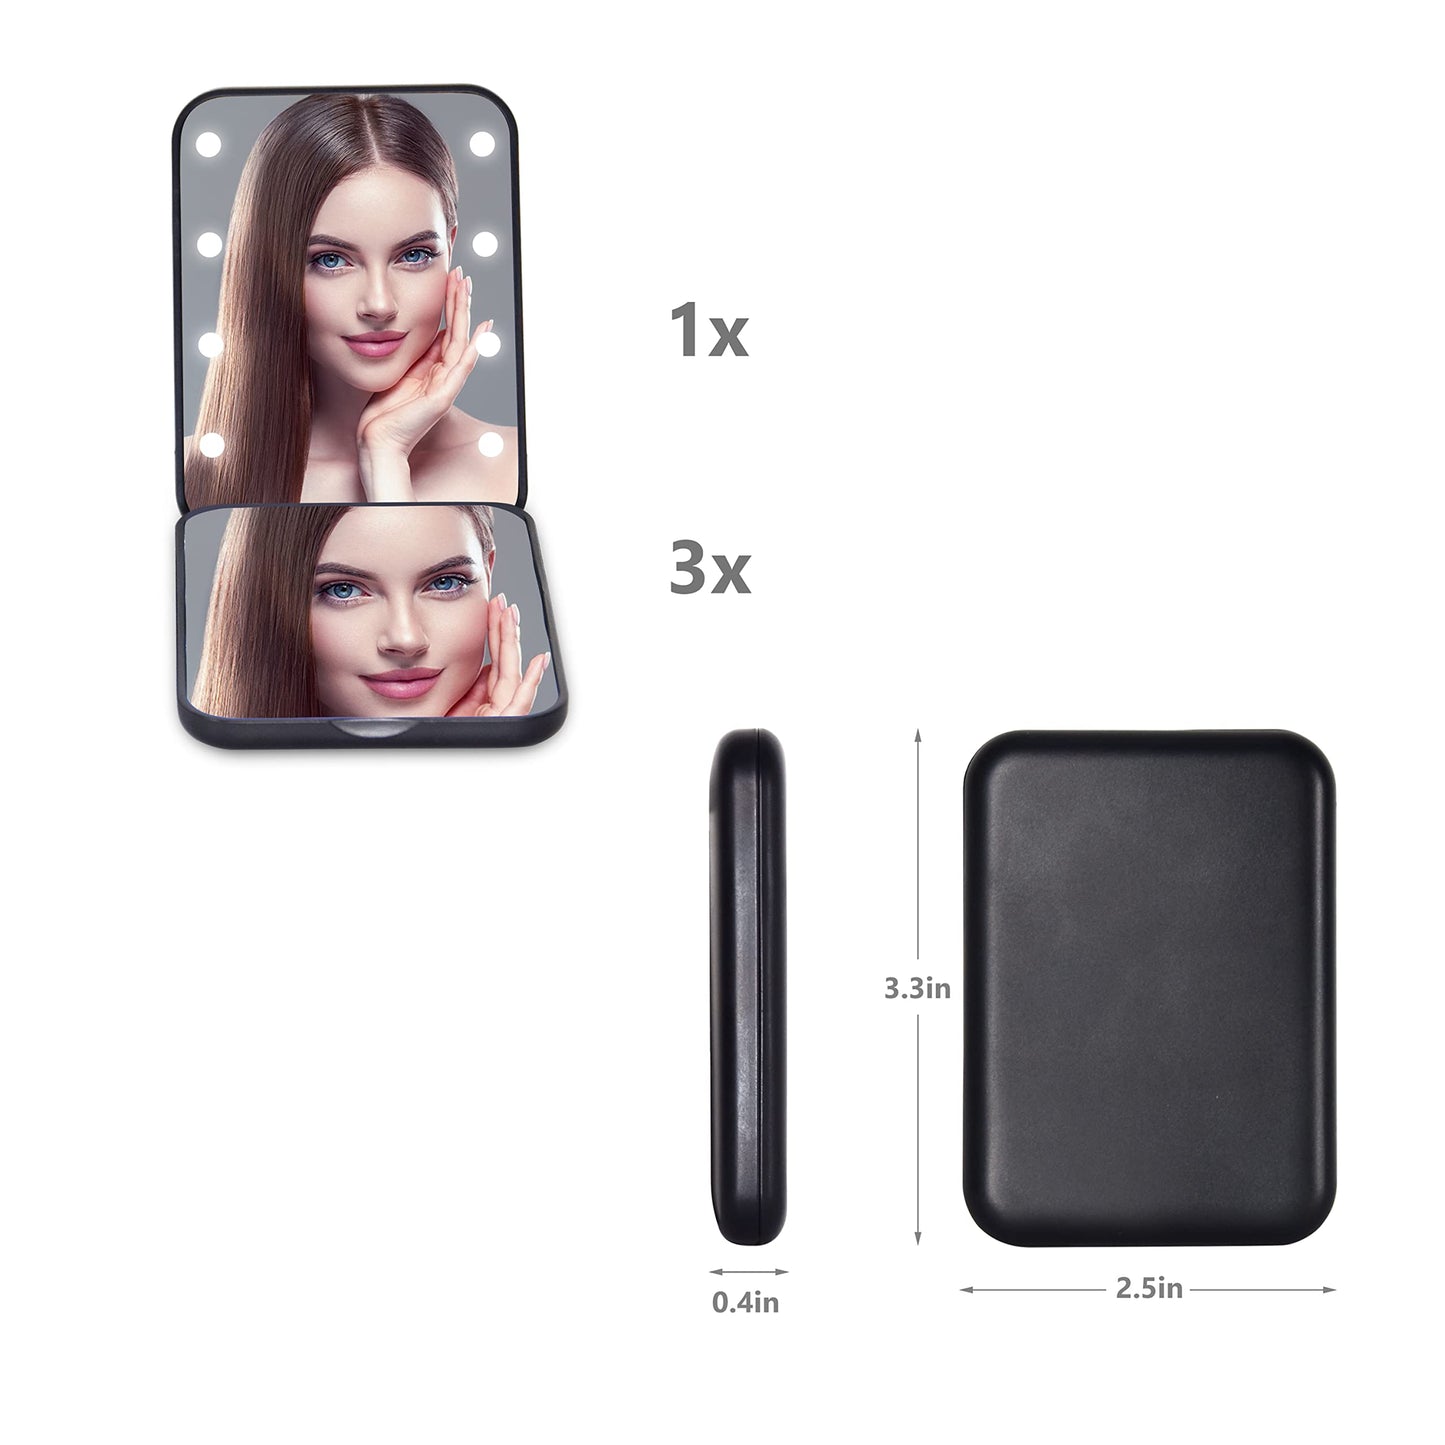 Kintion Pocket Mirror, 1X/3X Magnification LED Compact Travel Makeup / Purse Mirror with Light, , 2-Sided, Portable, Folding, Handheld, Small Lighted for Gift, Black